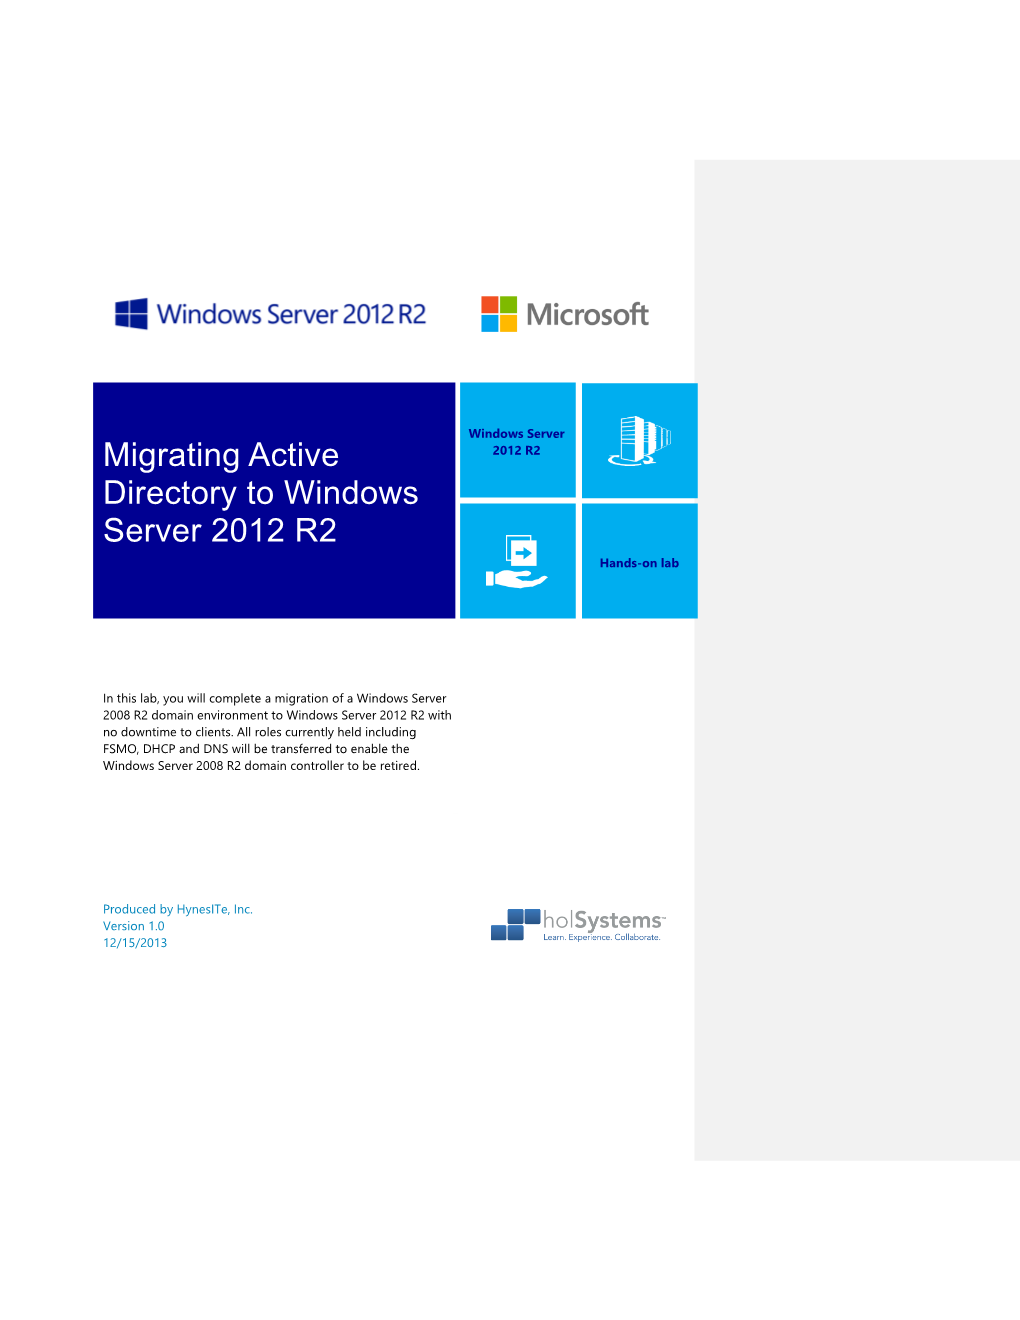 Migrating Active Directory to Windows Server 2012 R2